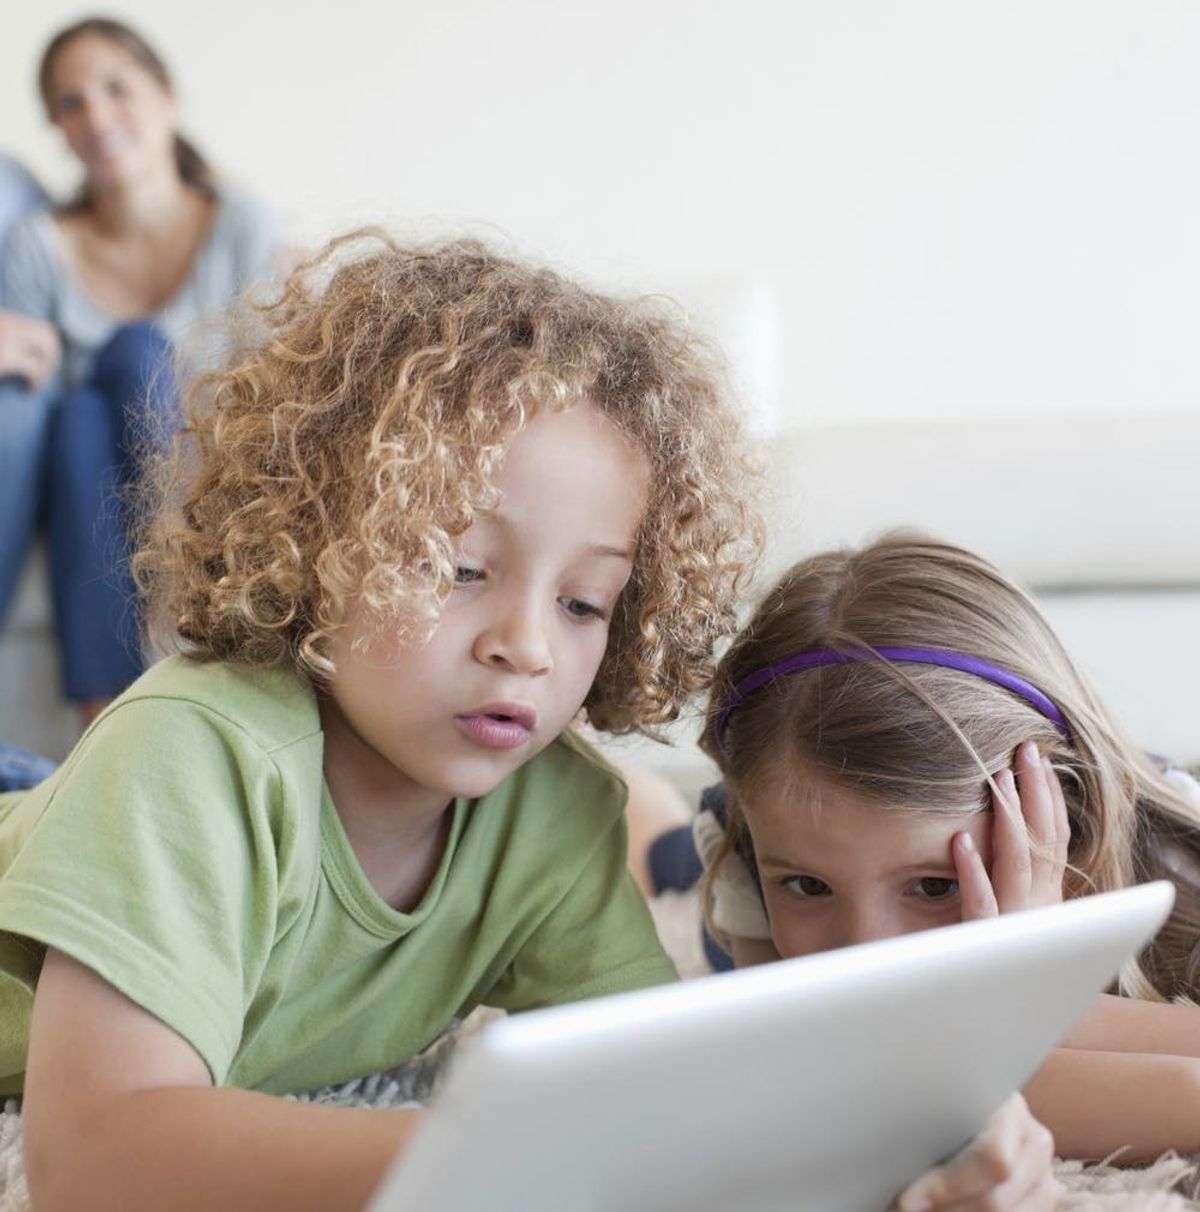 Silicon Valley Parents Have Good Reason to Want to Save Their Kids from Tech They Create